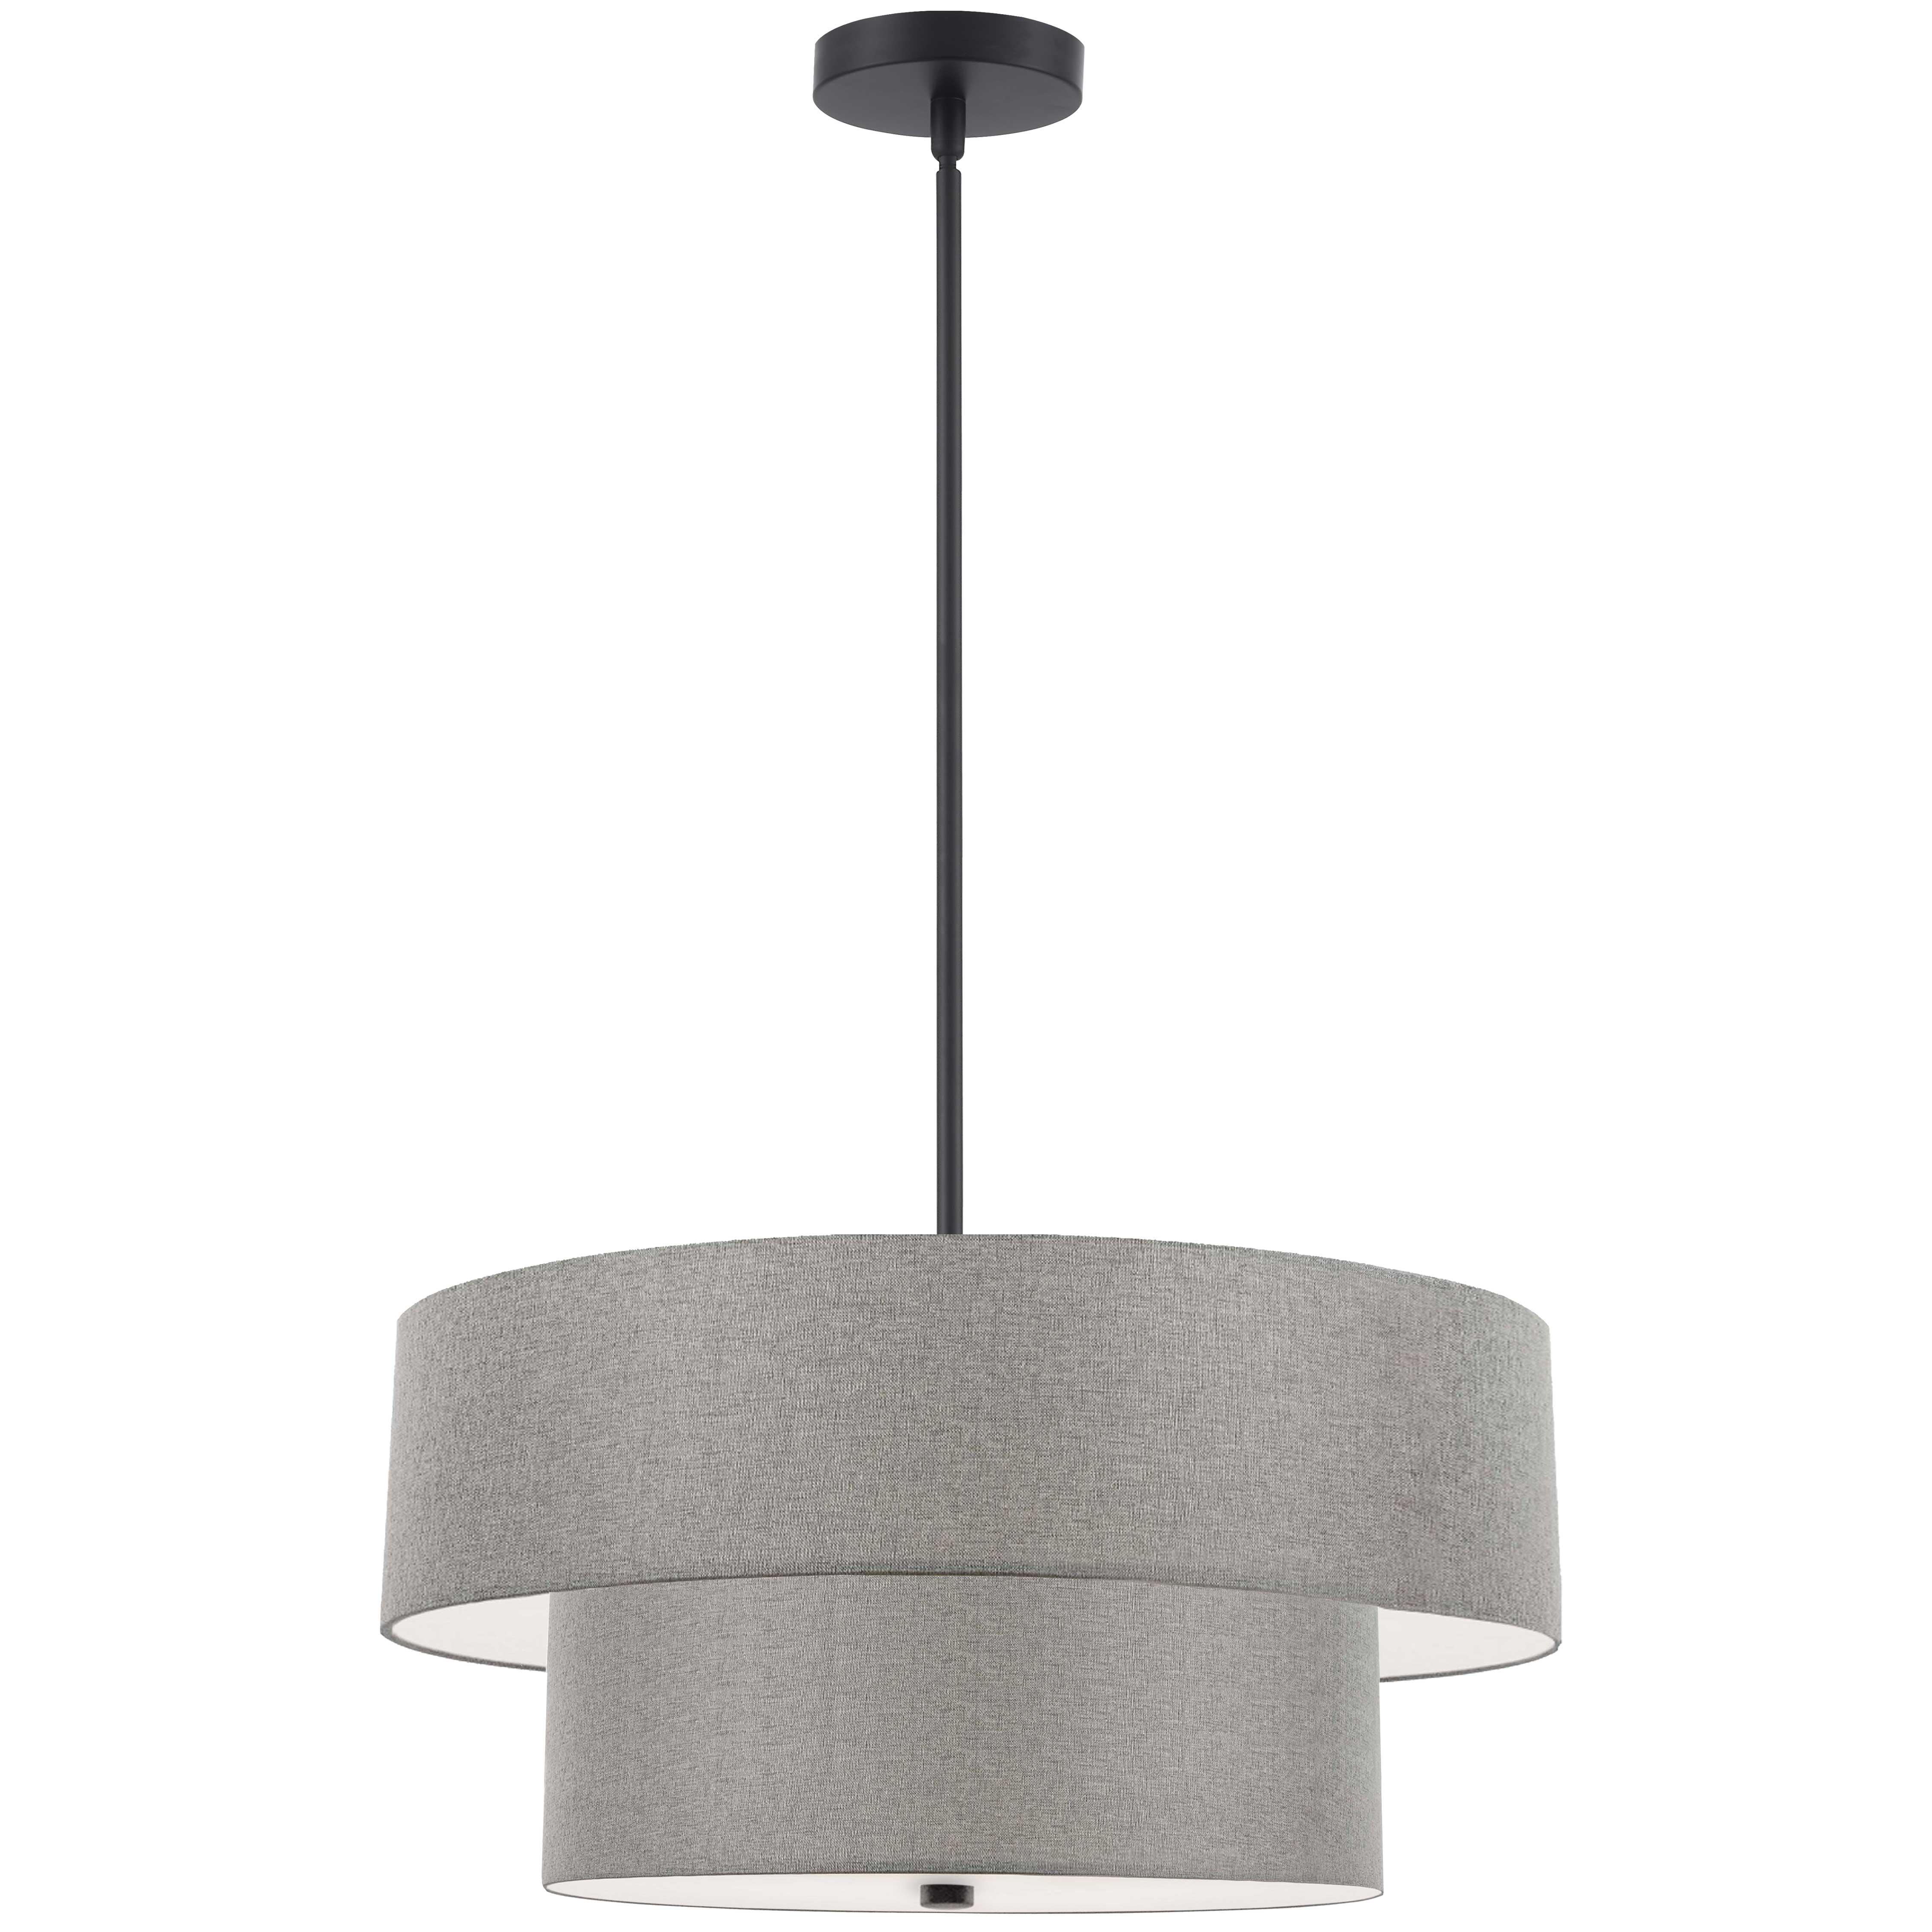 4LT Incand 2 Tier Pendant, MB w/ GRY Shade